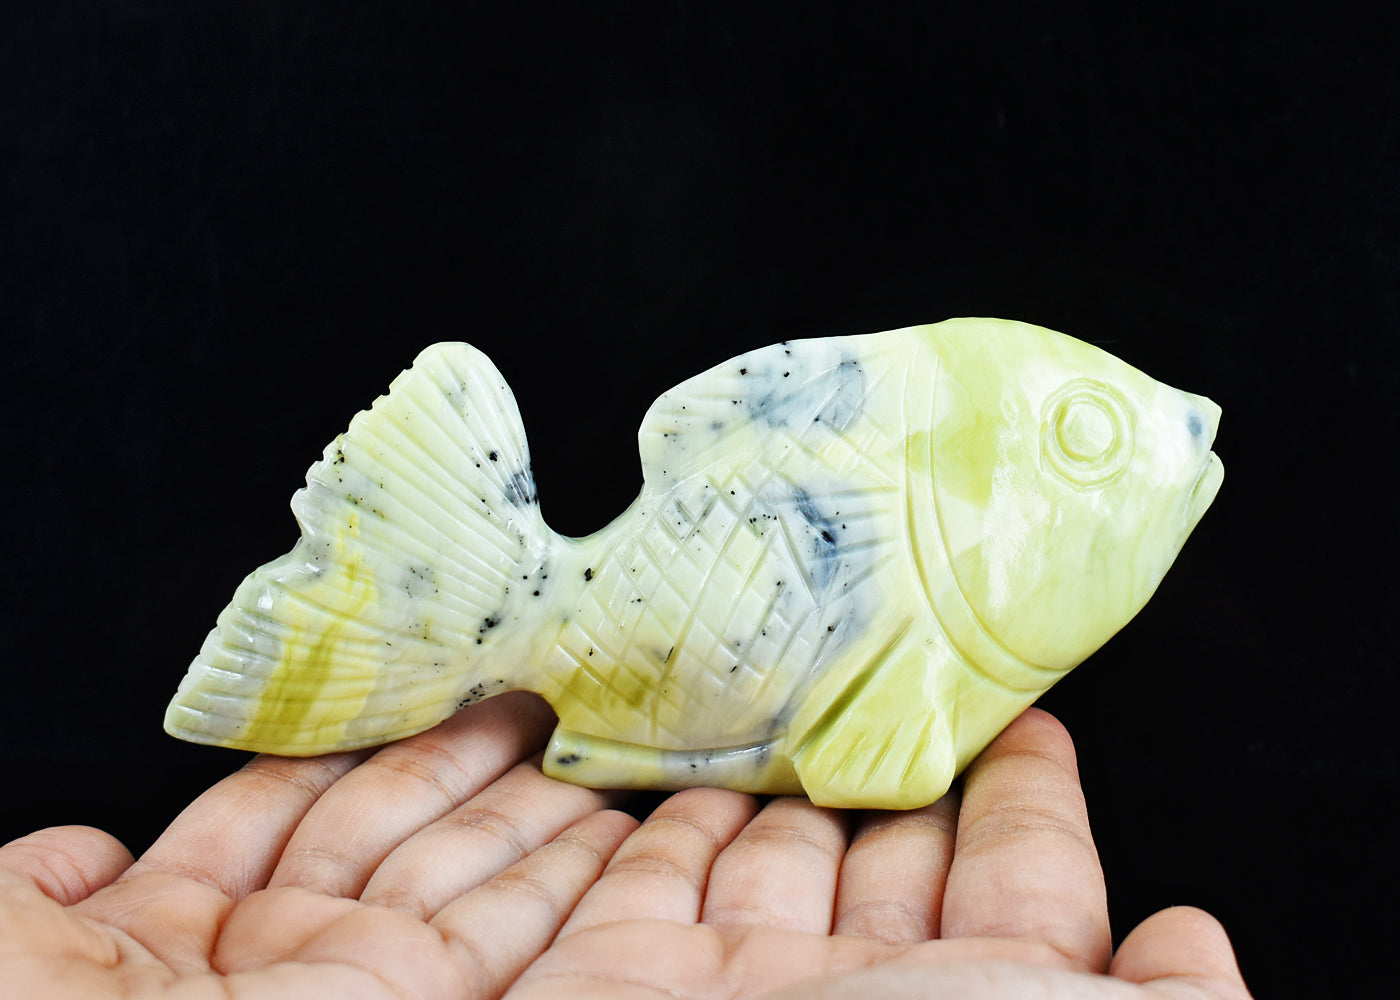 Amazing  1284.00  Carats  Genuine Green Opal Hand Carved Crystal Gemstone Fish Carving